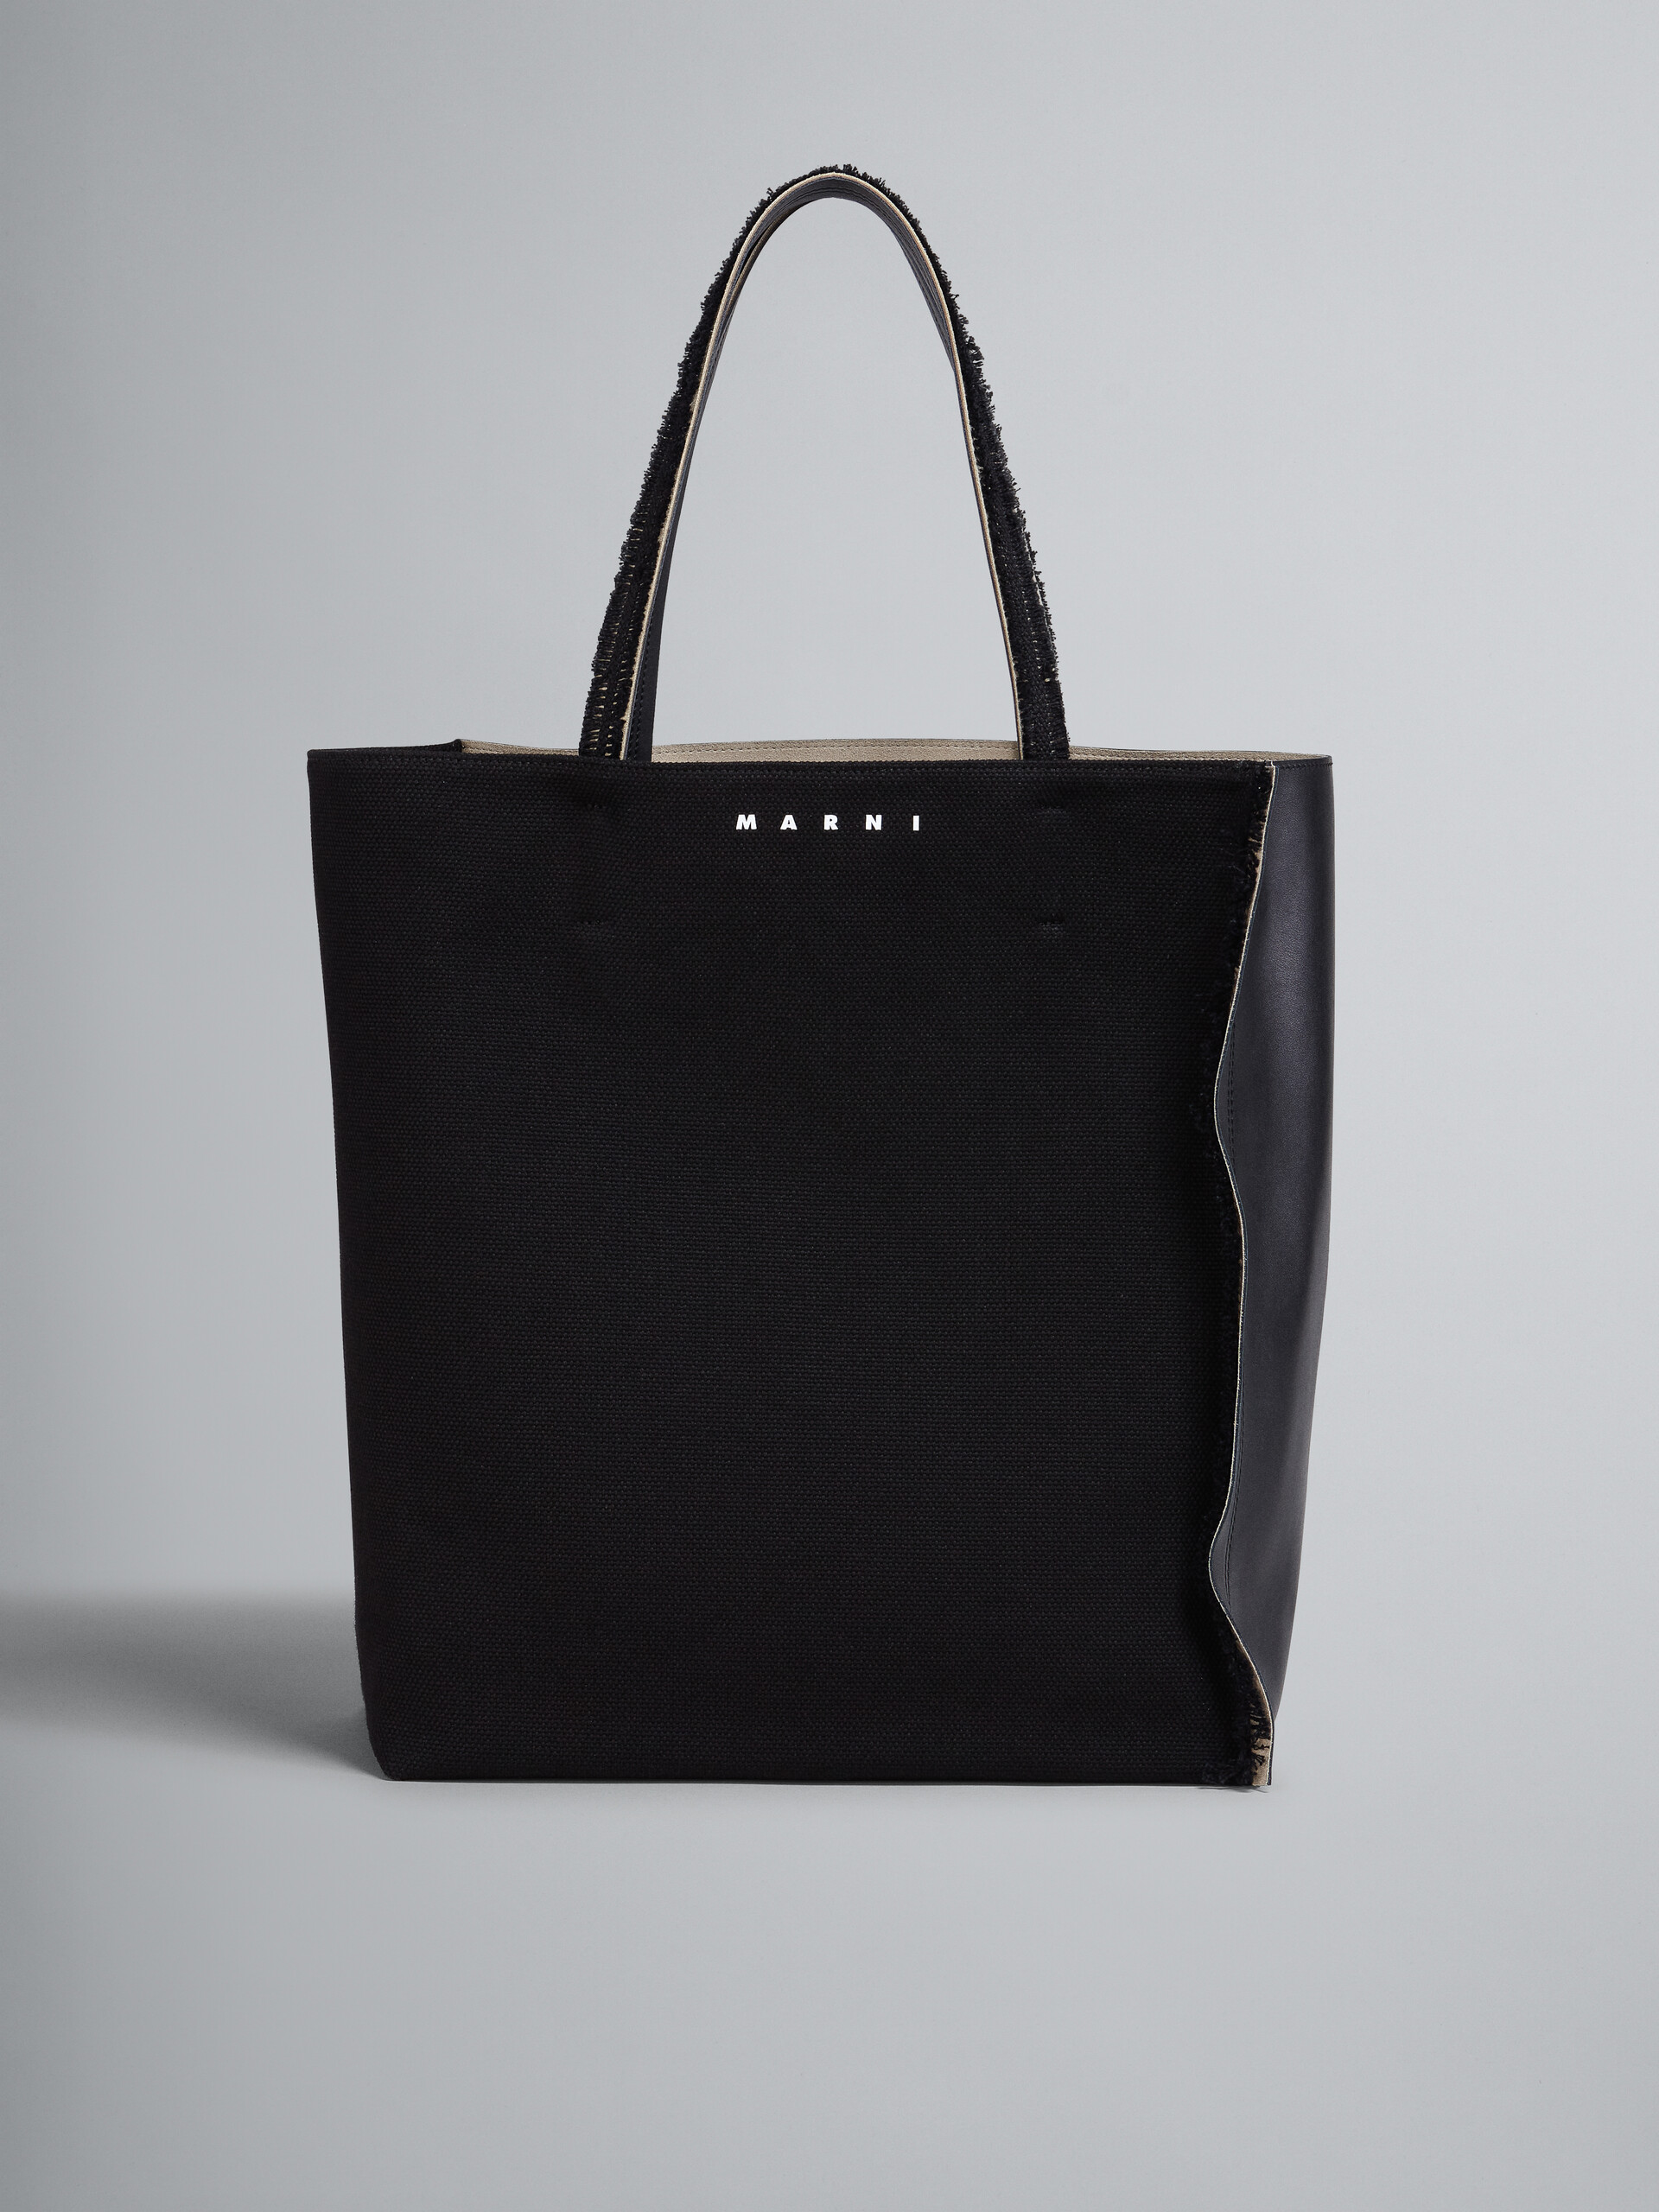 Black leather and canvas MUSEO SOFT shopping bag - Shopping Bags - Image 1